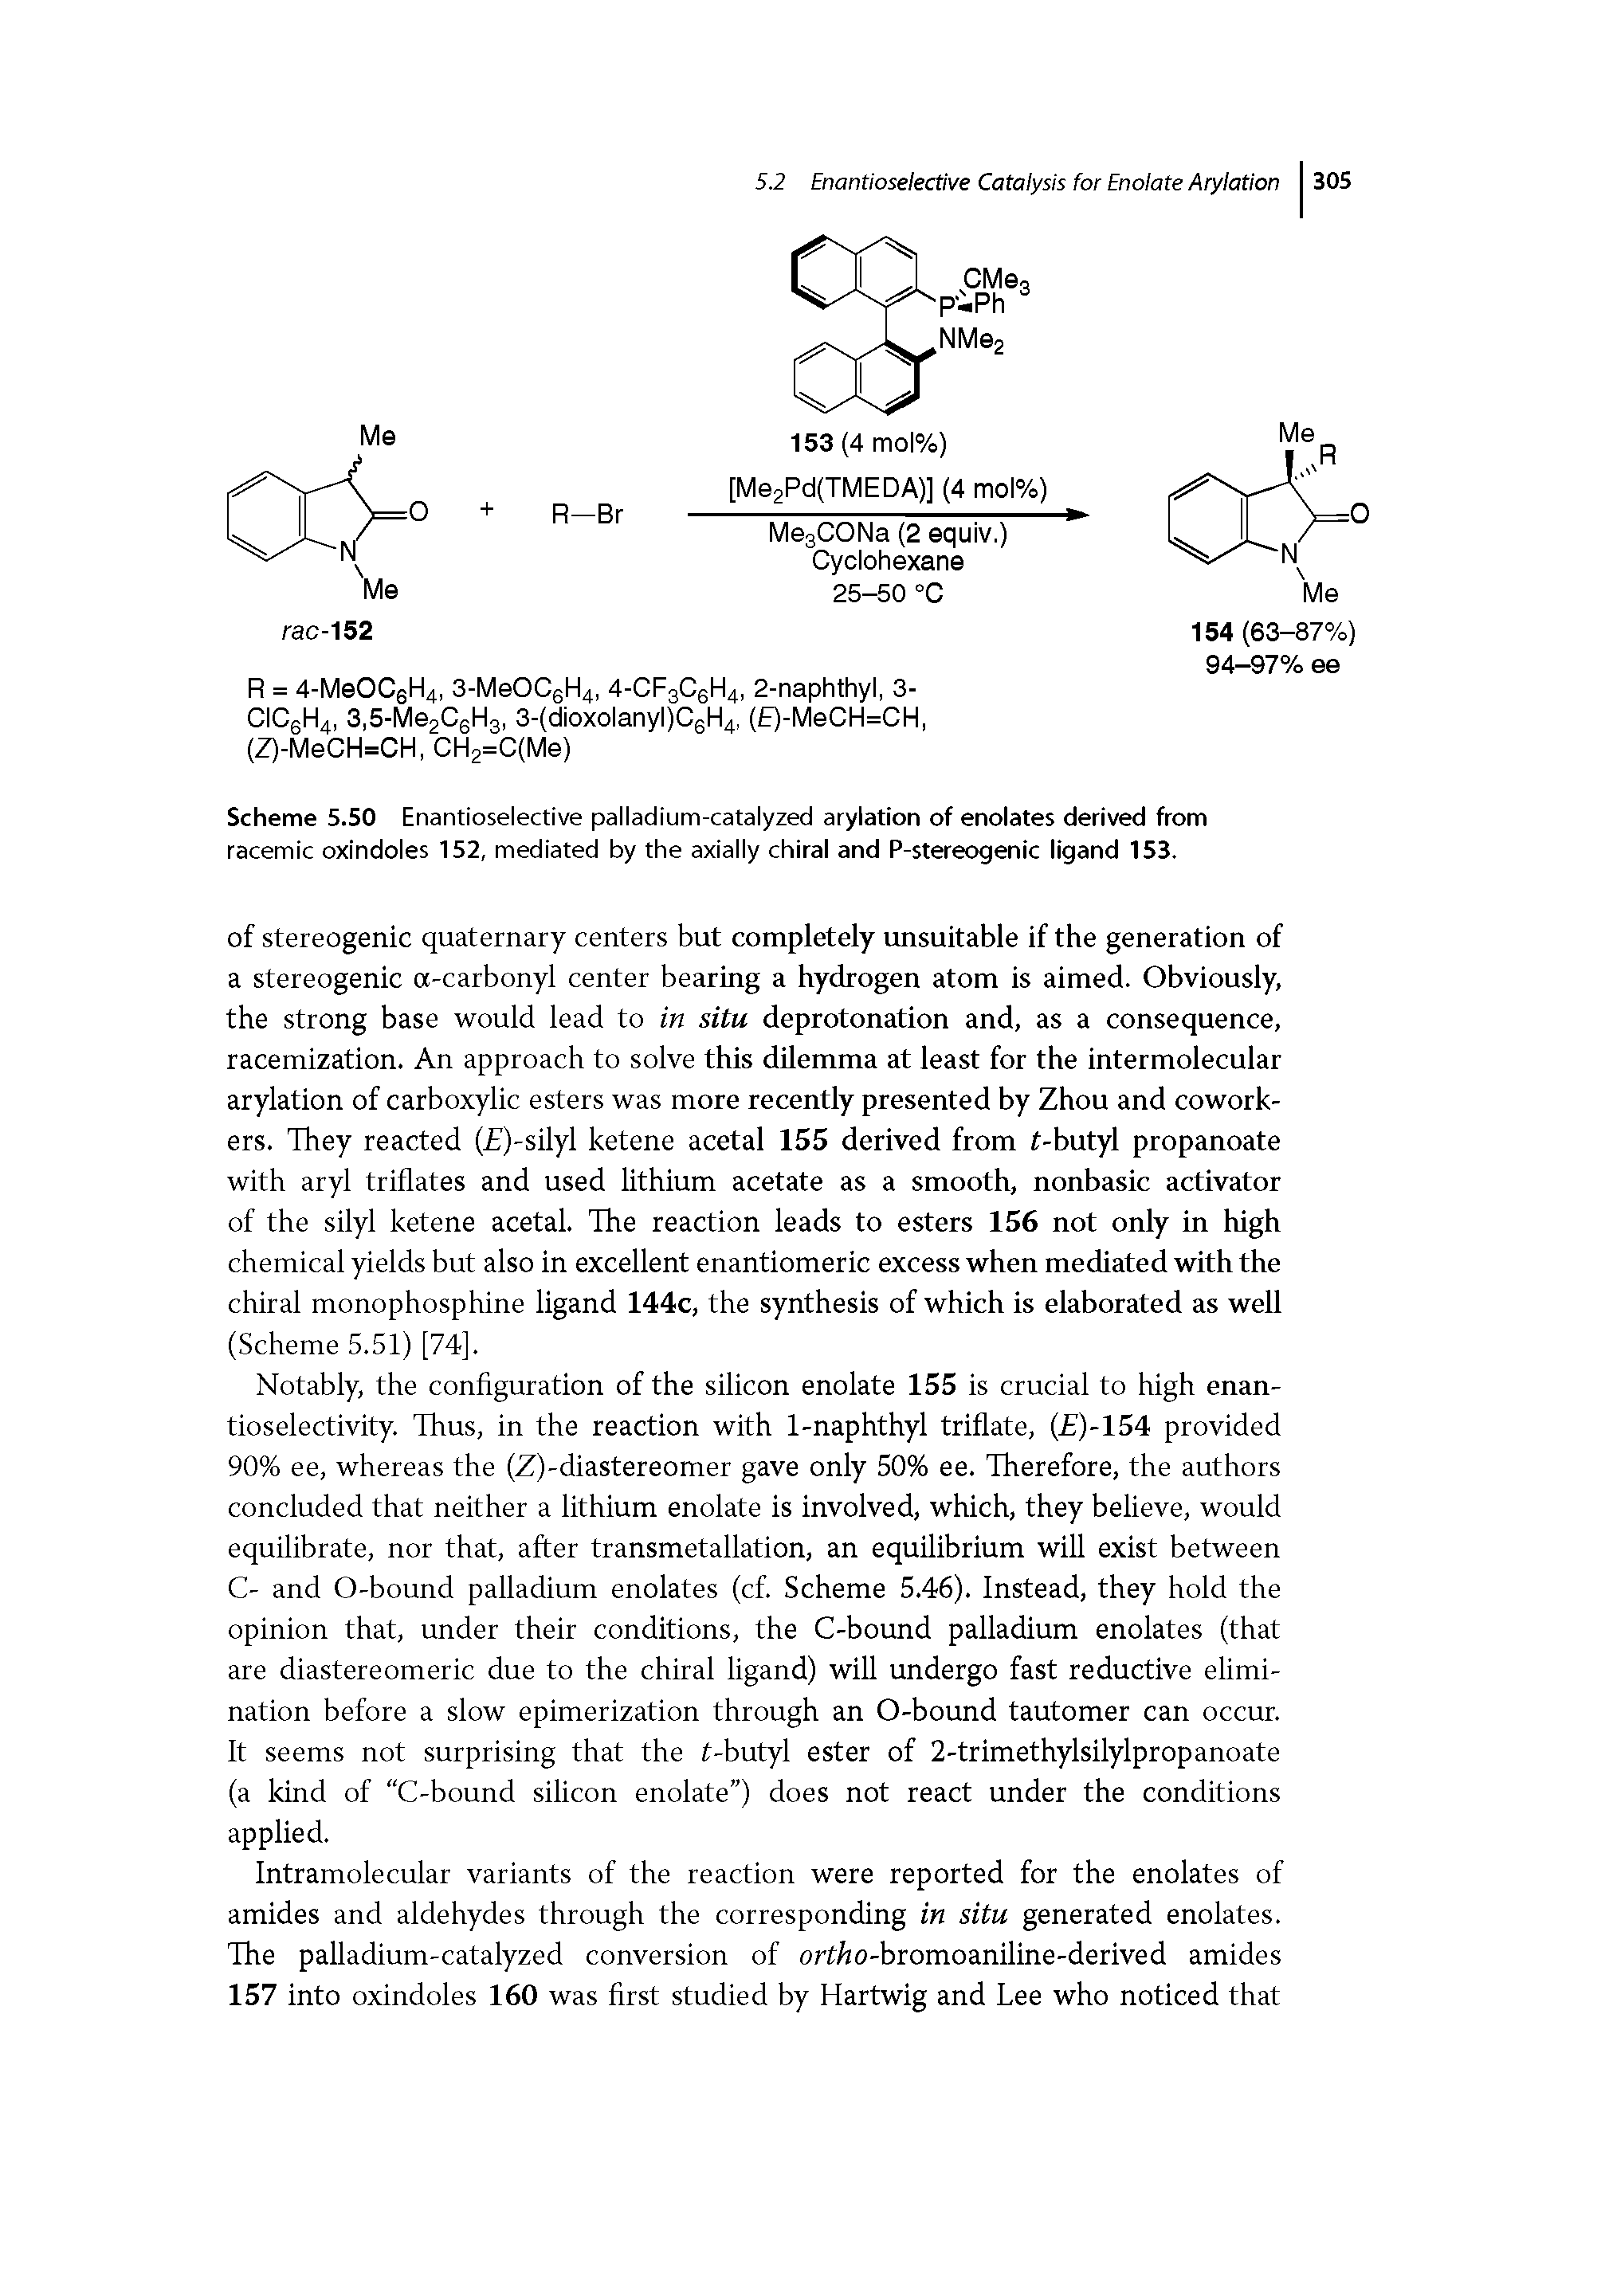 Scheme 5.50 Enantioselective palladium-catalyzed arylation of enolates derived from racemic oxindoles 152, mediated by the axially chiral and P-stereogenic ligand 153.